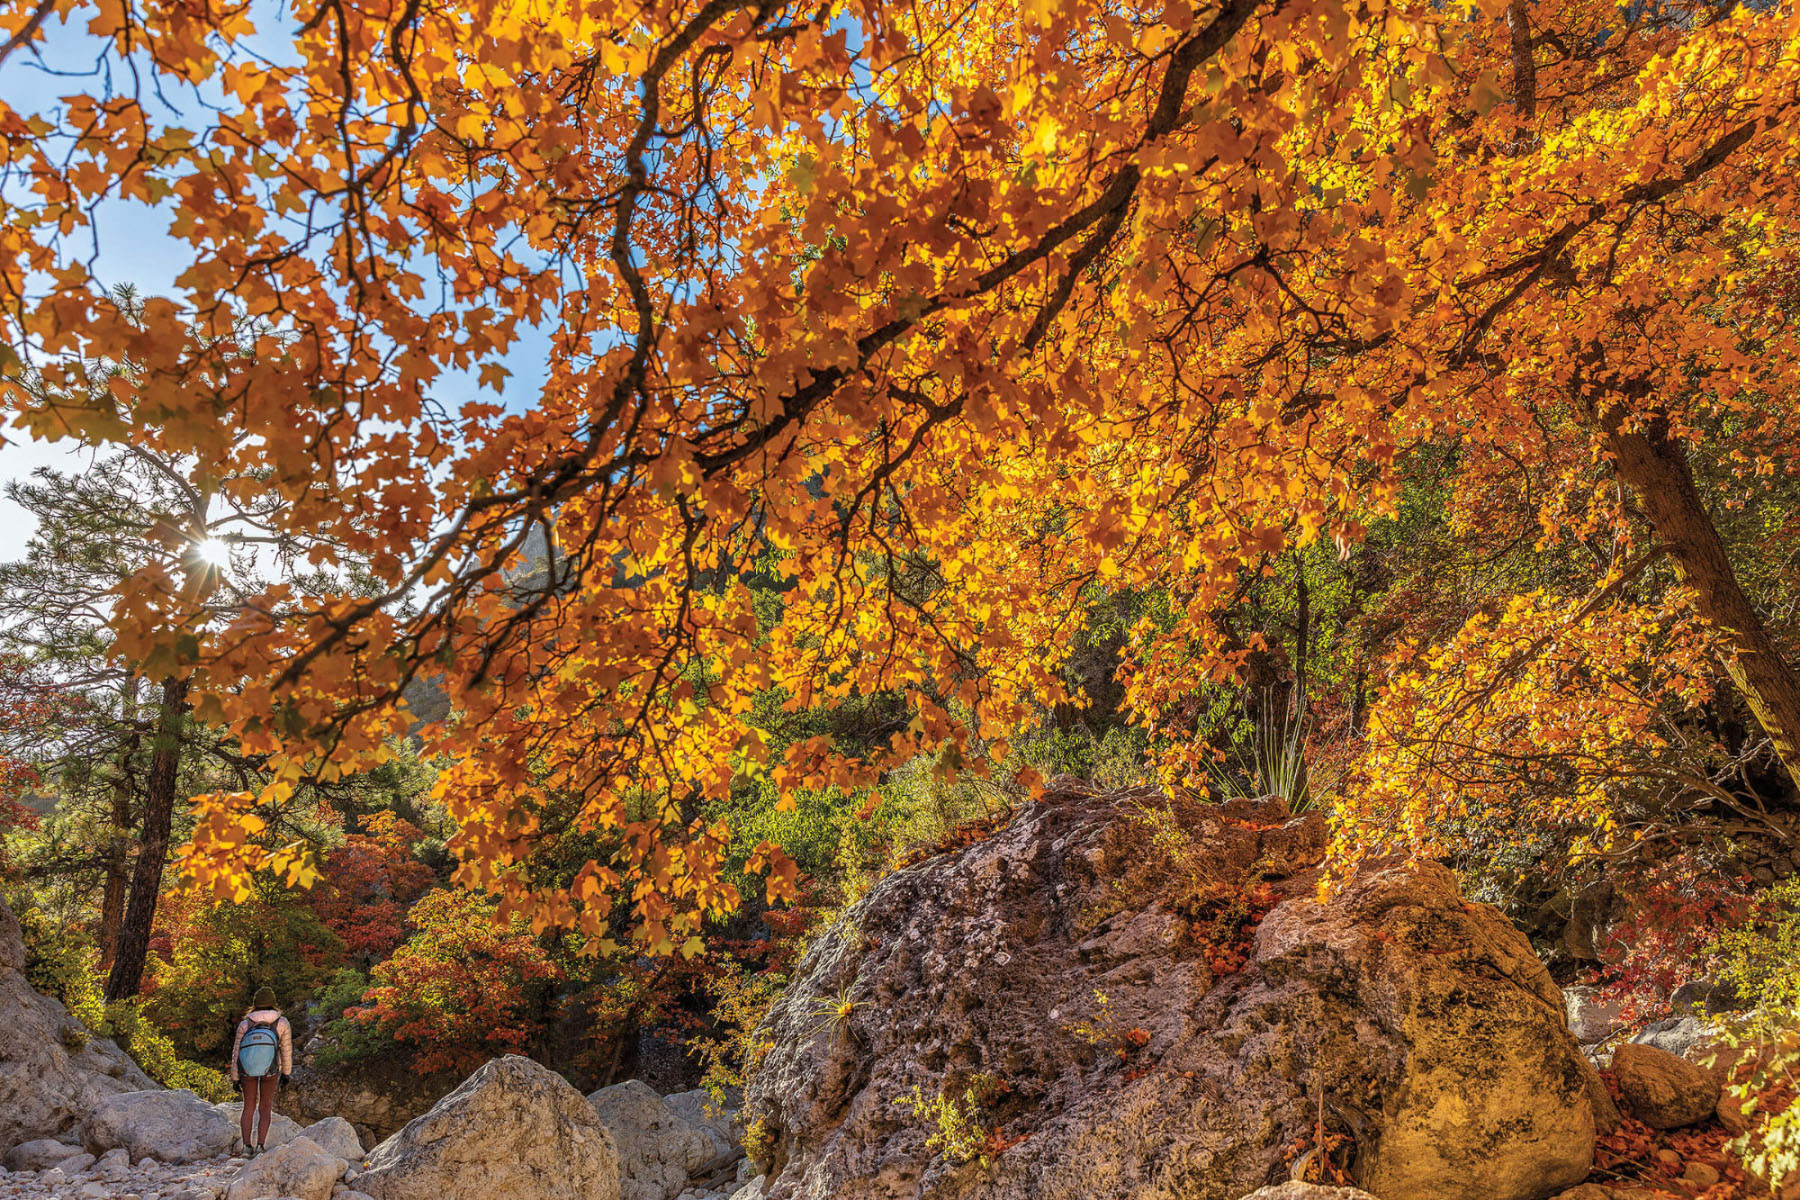 Bright orange leaves dominate a scene on a rocky surface with a lone hiker on a trail. Blue sky peeks through some leaves.